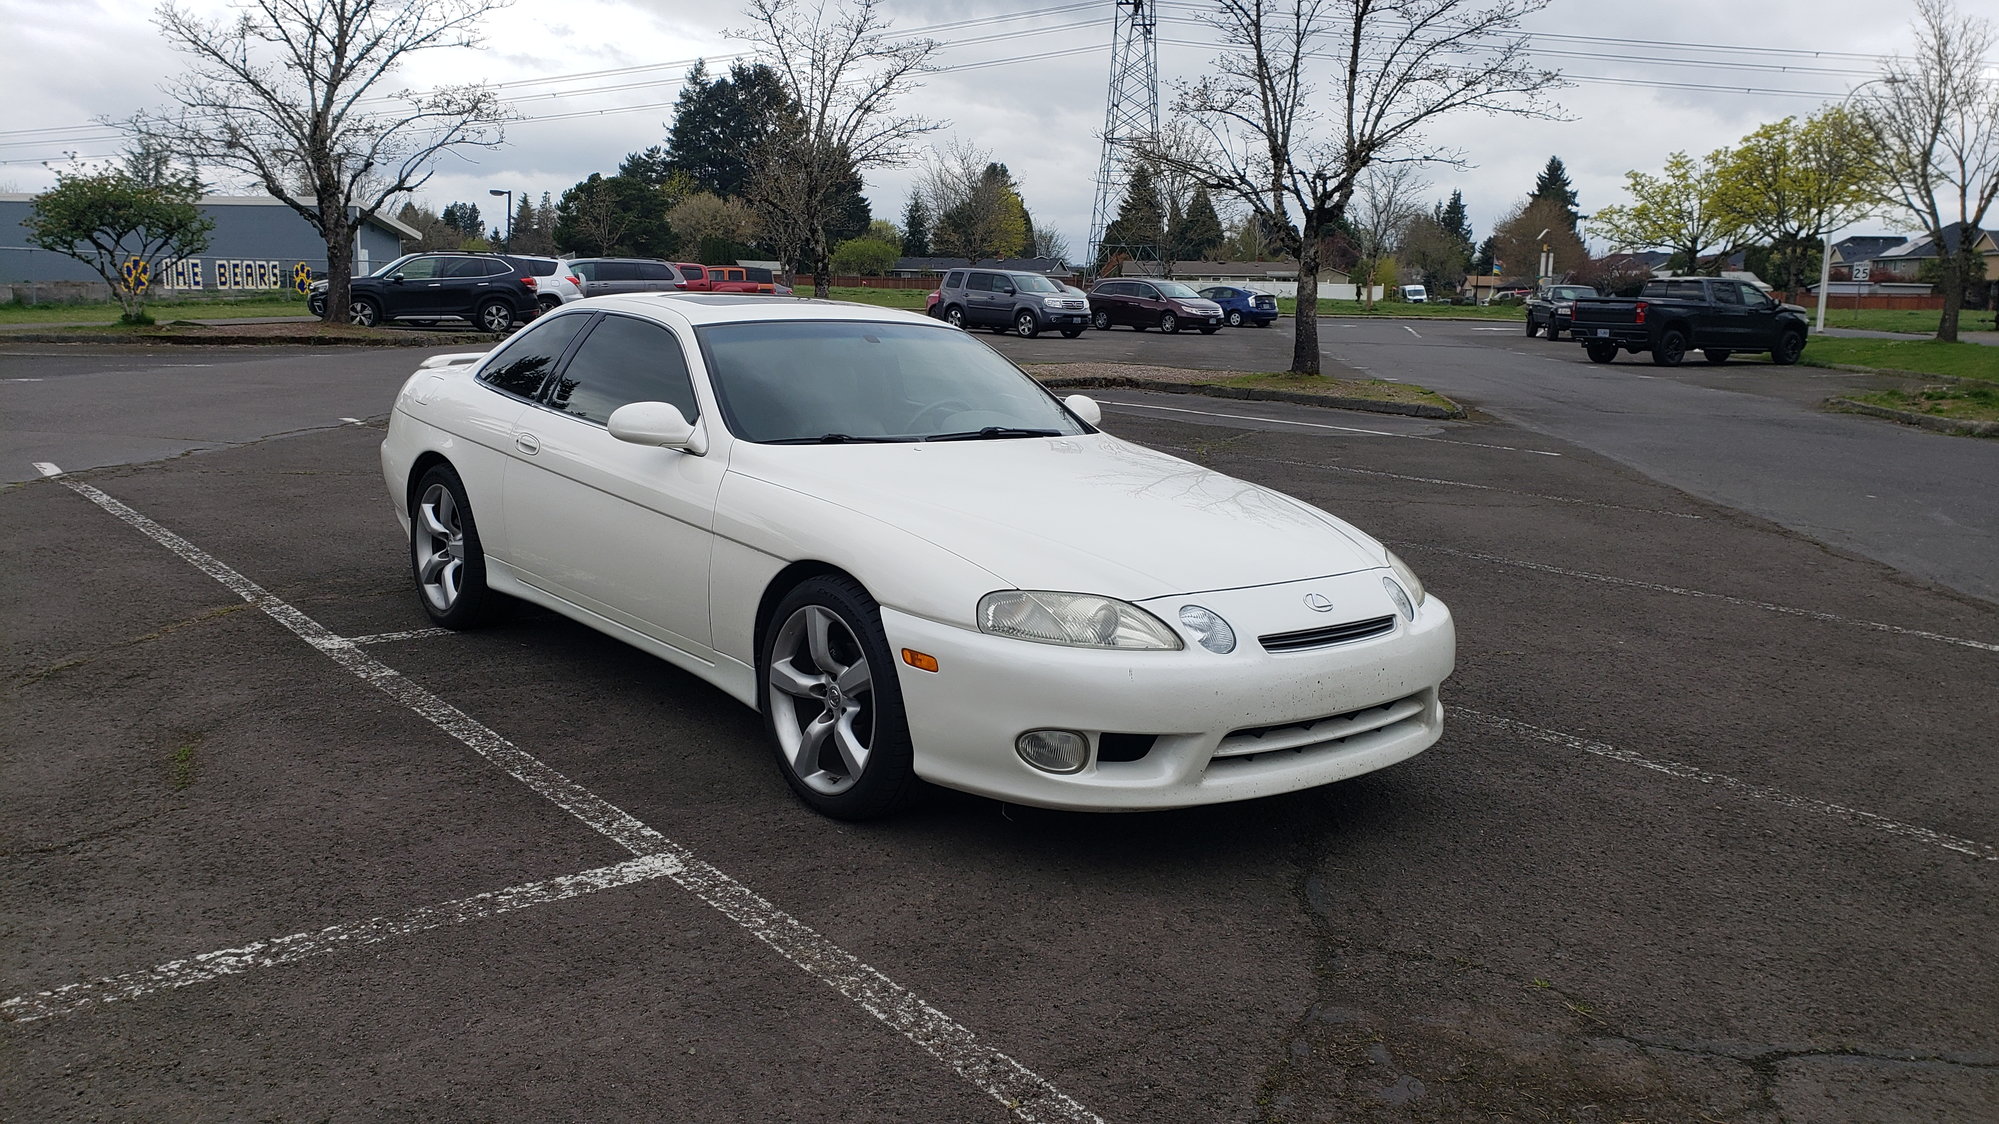 Why don't we see as many modified Lexus like the SC-400 below? Why is is  not as popular? : r/JDM